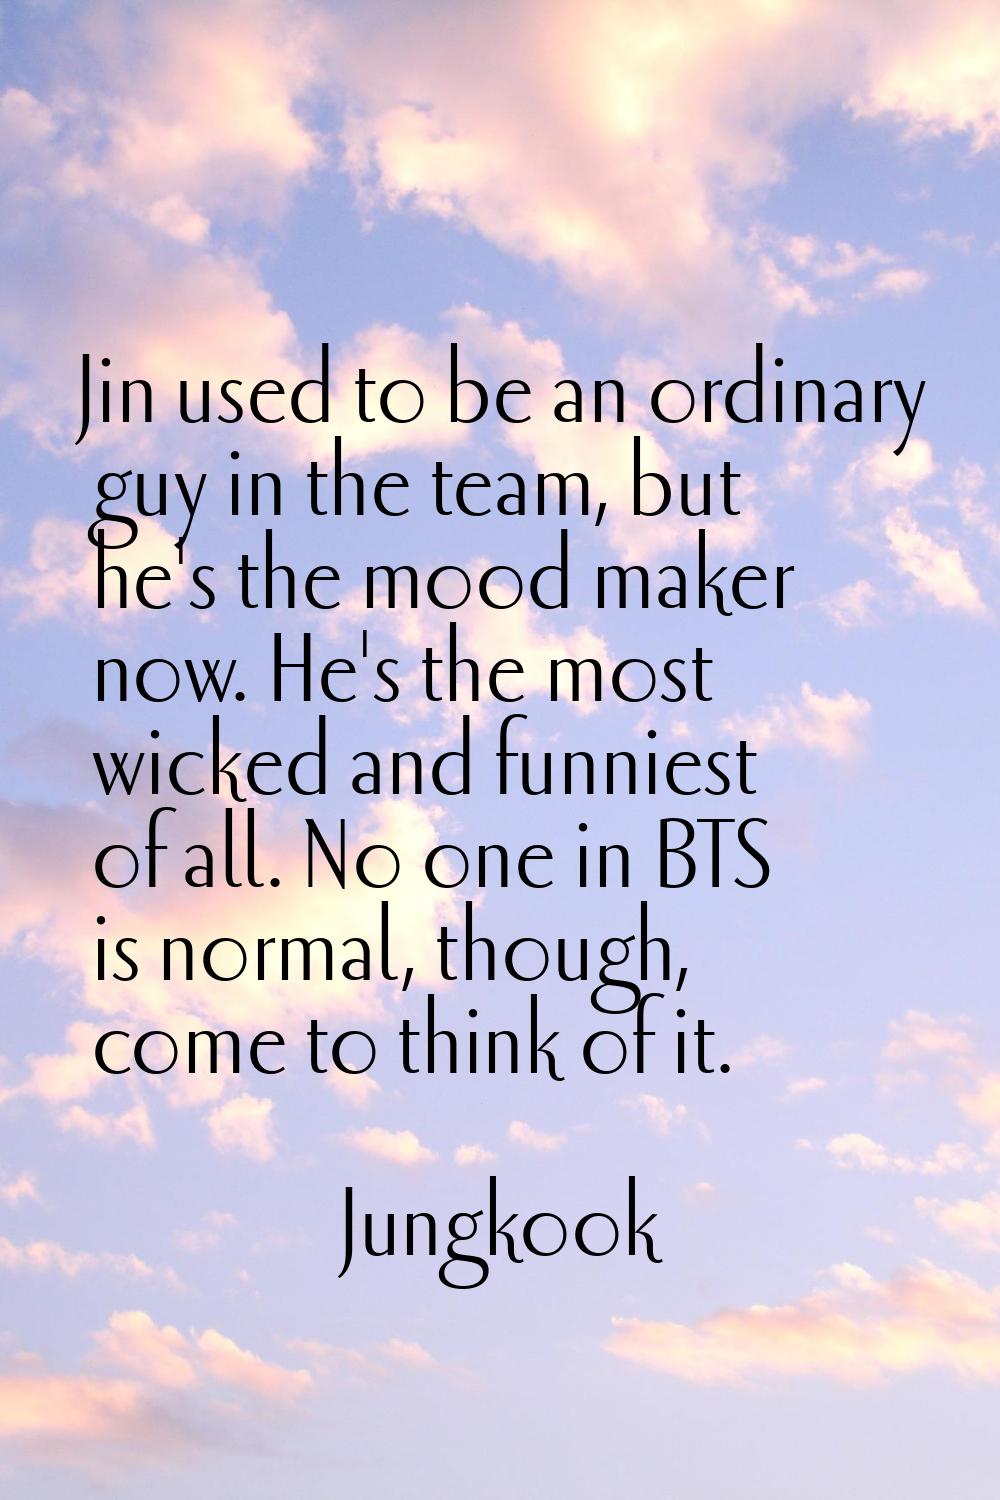 Jin used to be an ordinary guy in the team, but he's the mood maker now. He's the most wicked and f